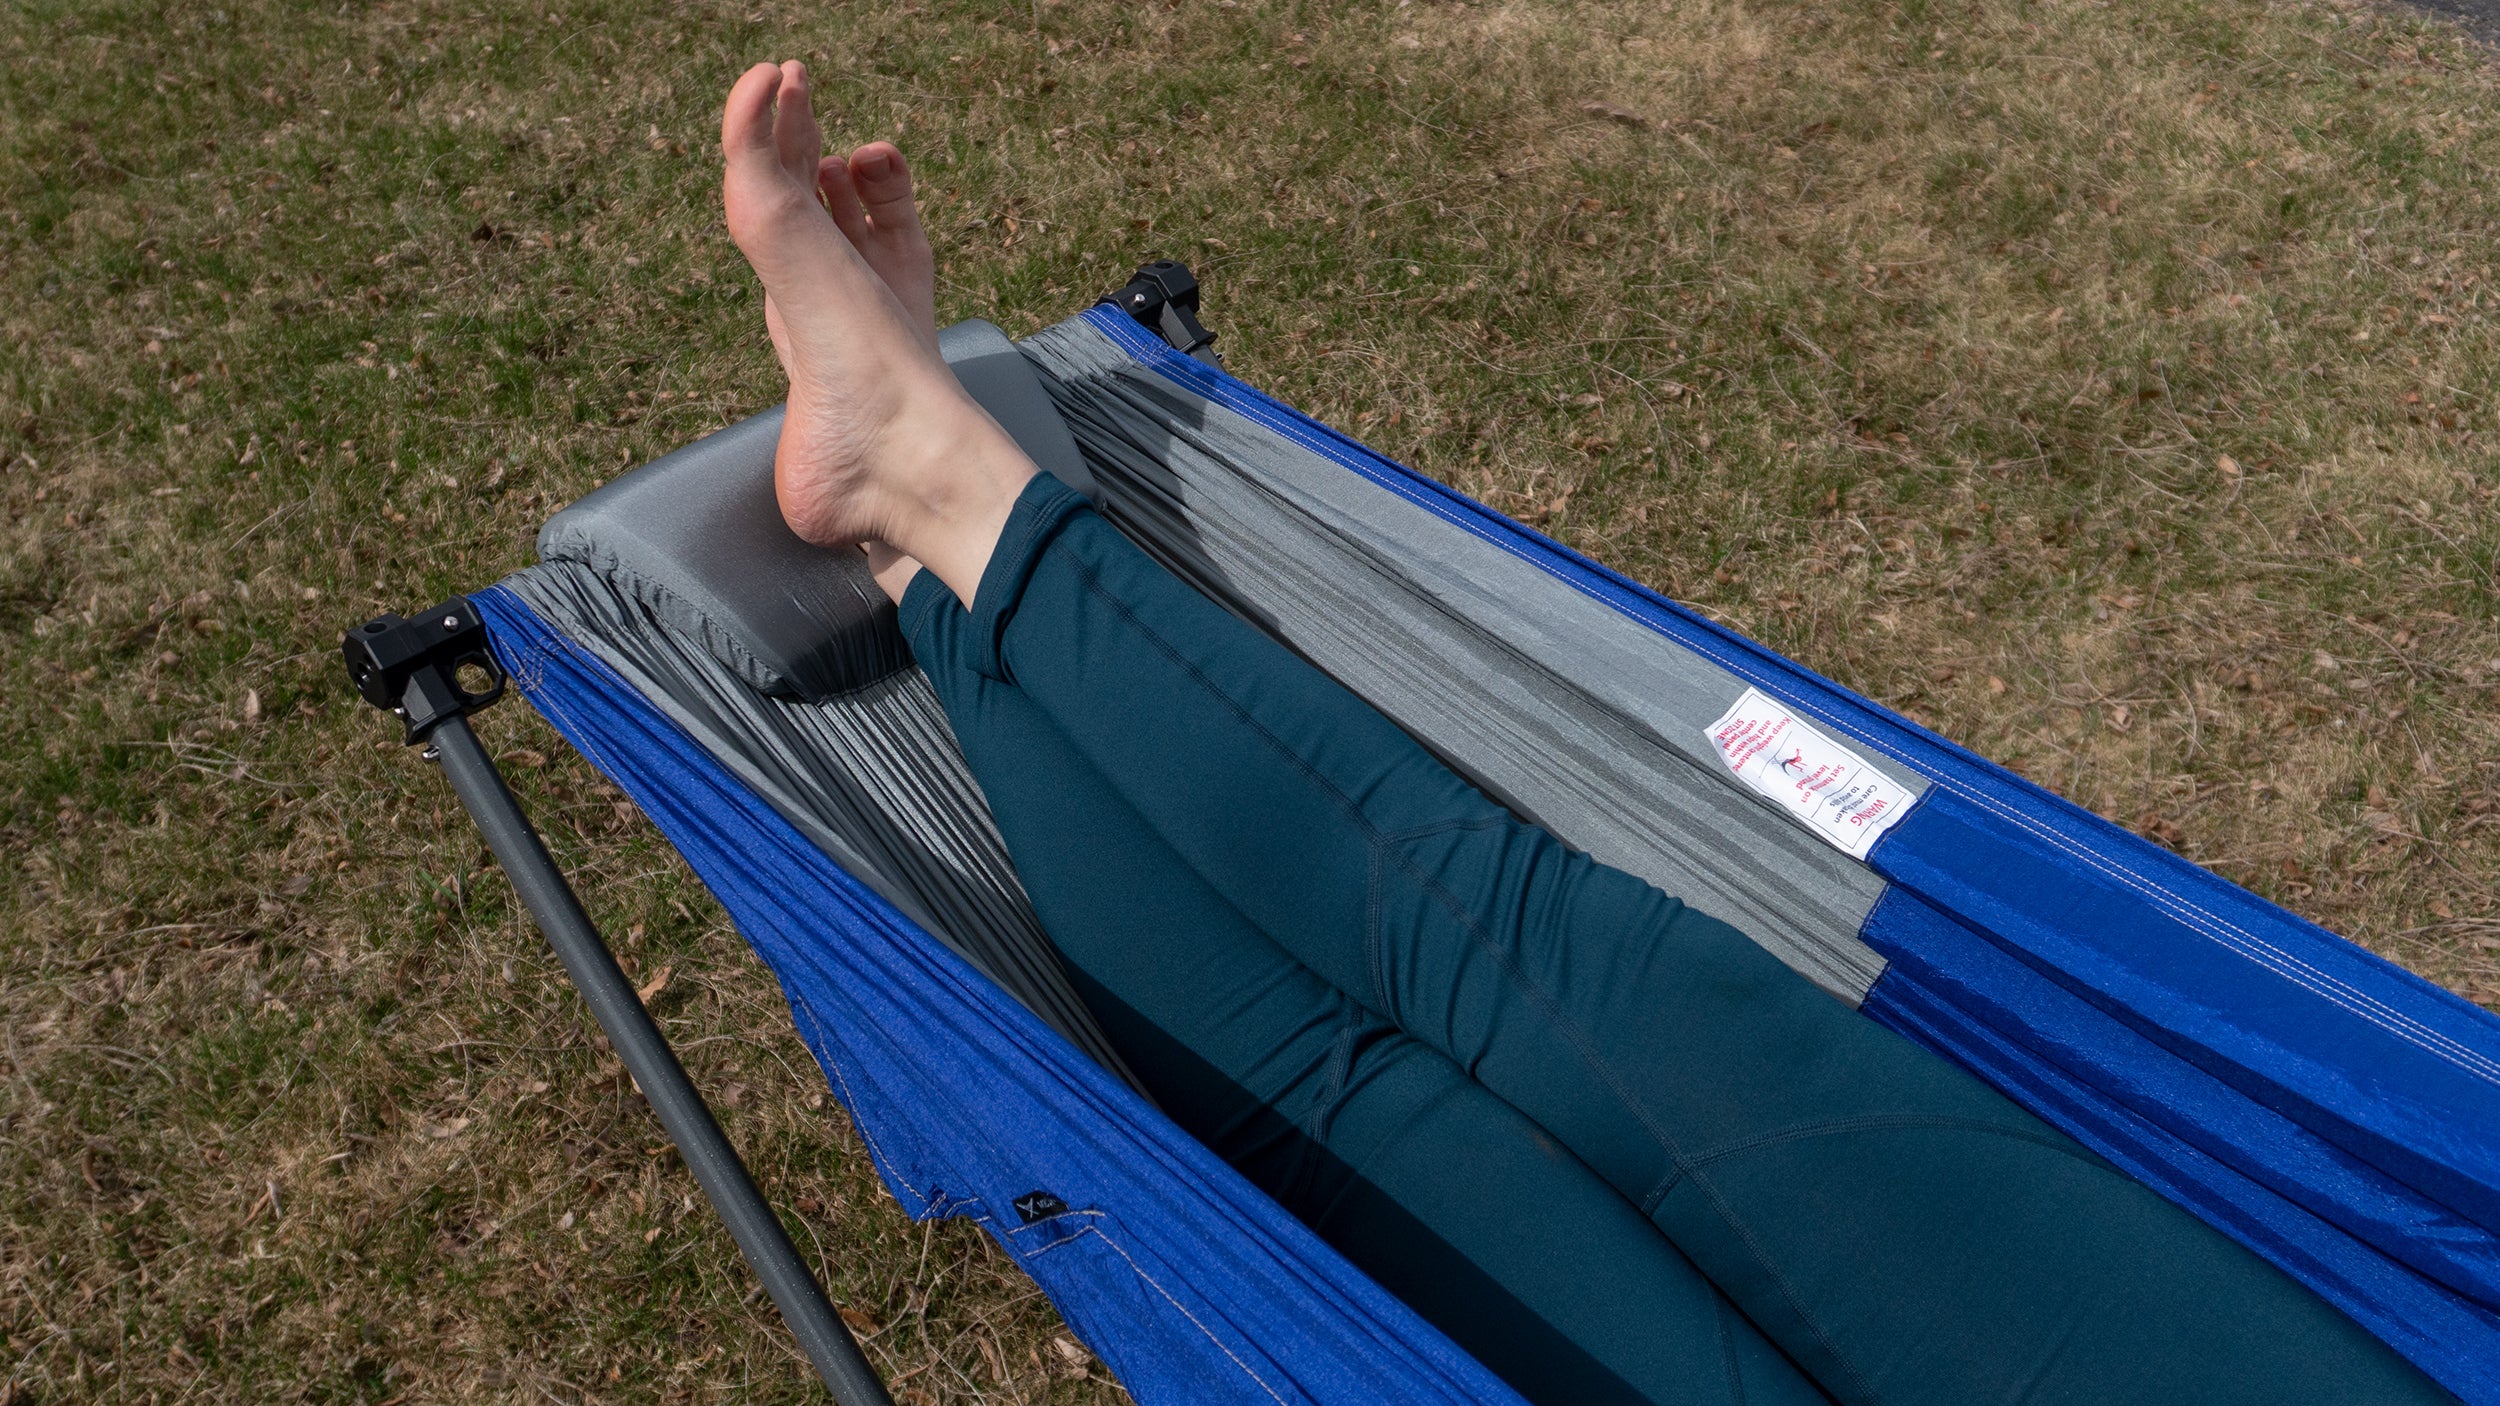 The Mock ONE hammock is made from the same type of soft nylon material as parachutes, and feels very breathable and comfortable to stretch out in. (Photo: Andrew Liszewski/Gizmodo)